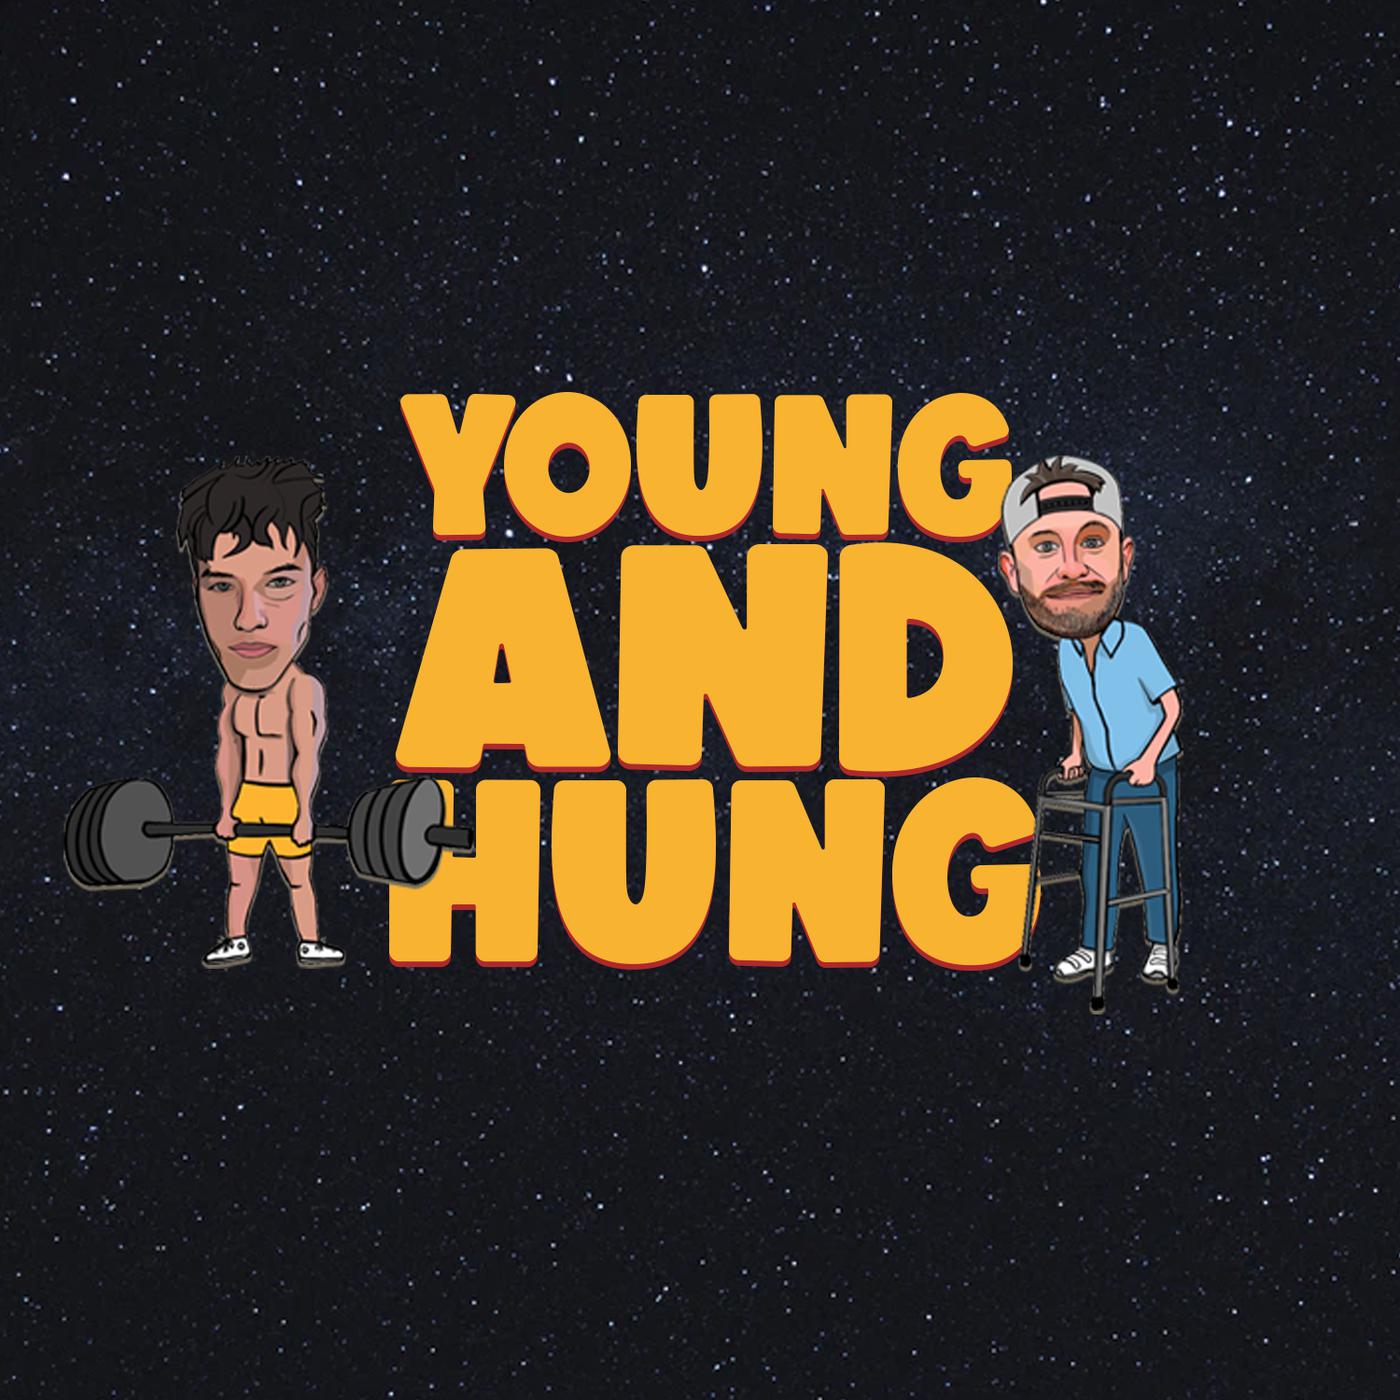 chris leto recommends young and hung boys pic